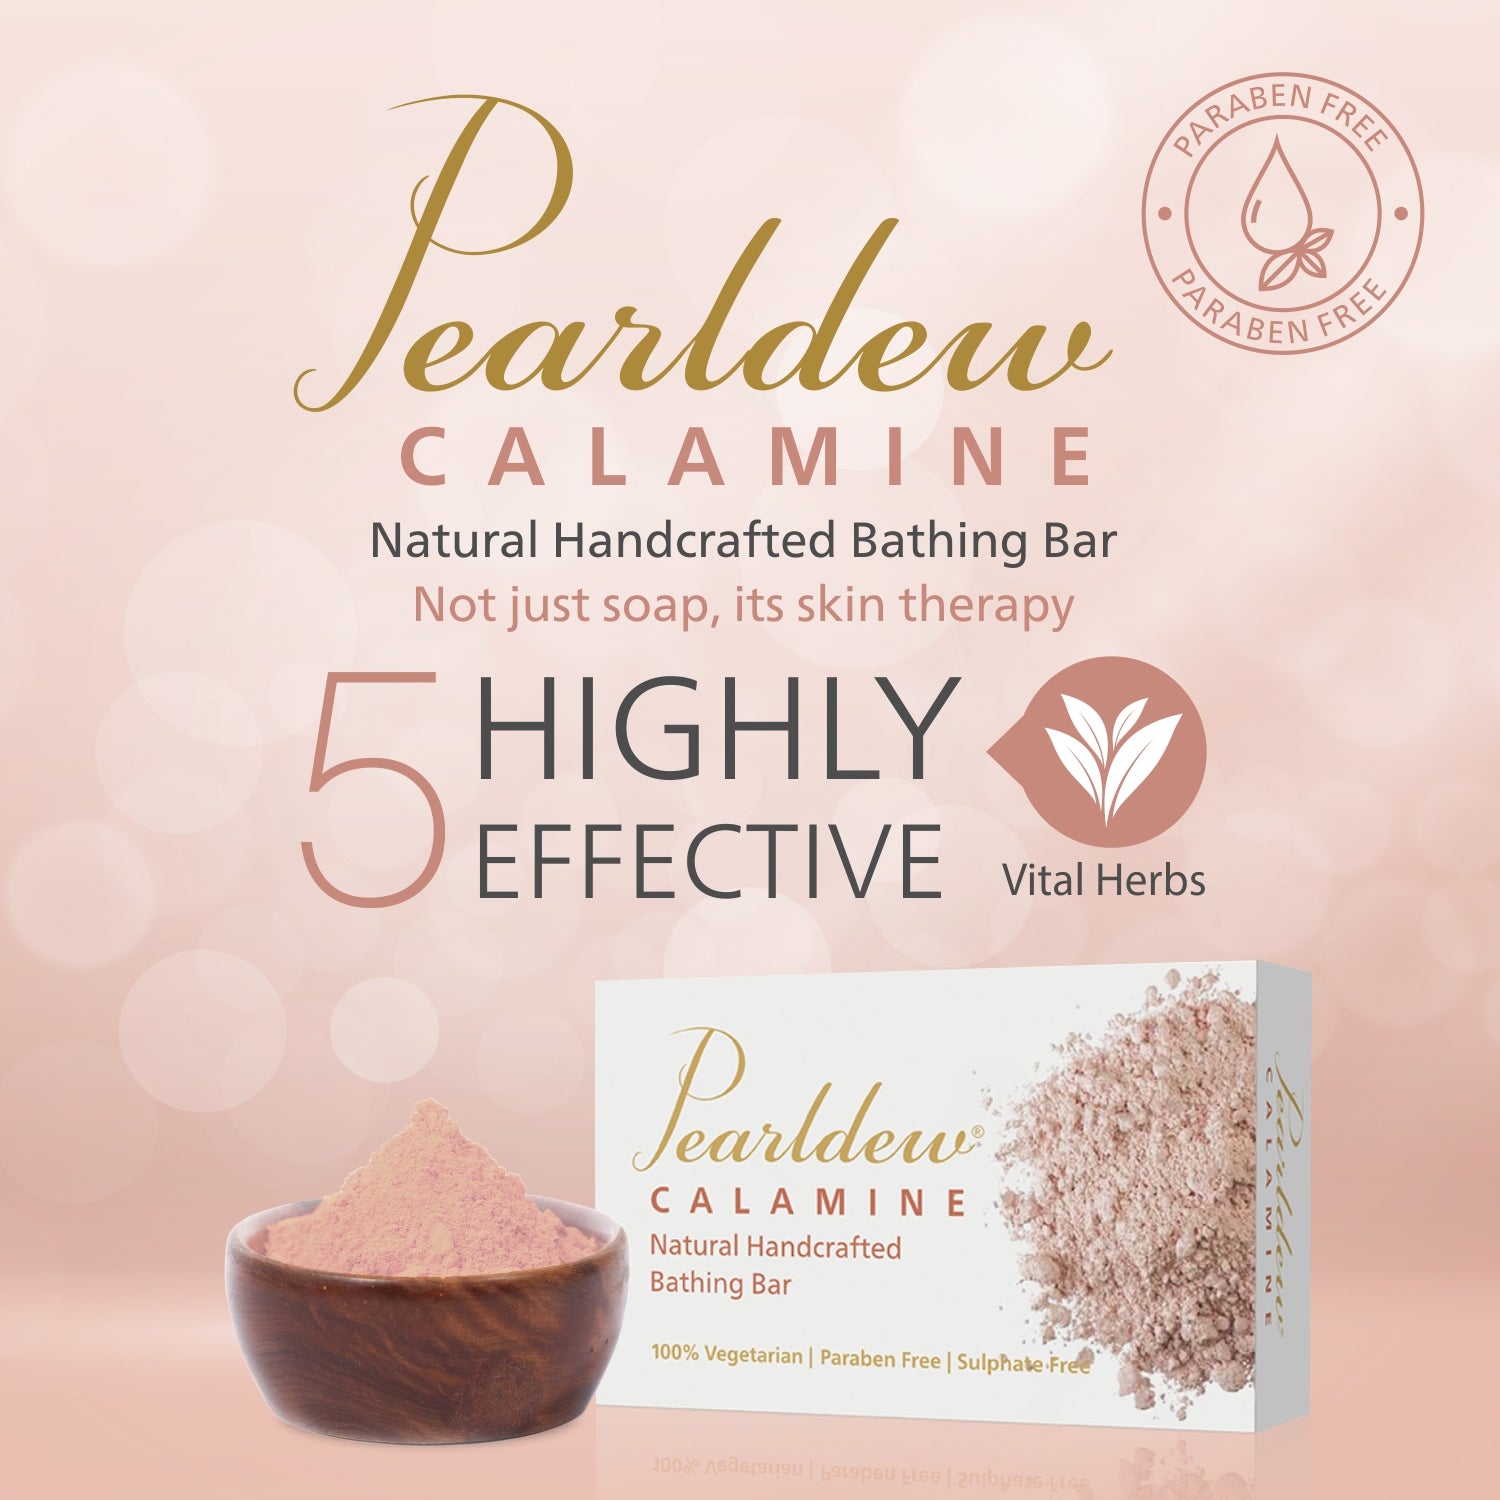 Pearldew Calamine Natural Handcrafted Bathing Bar (75 gm)